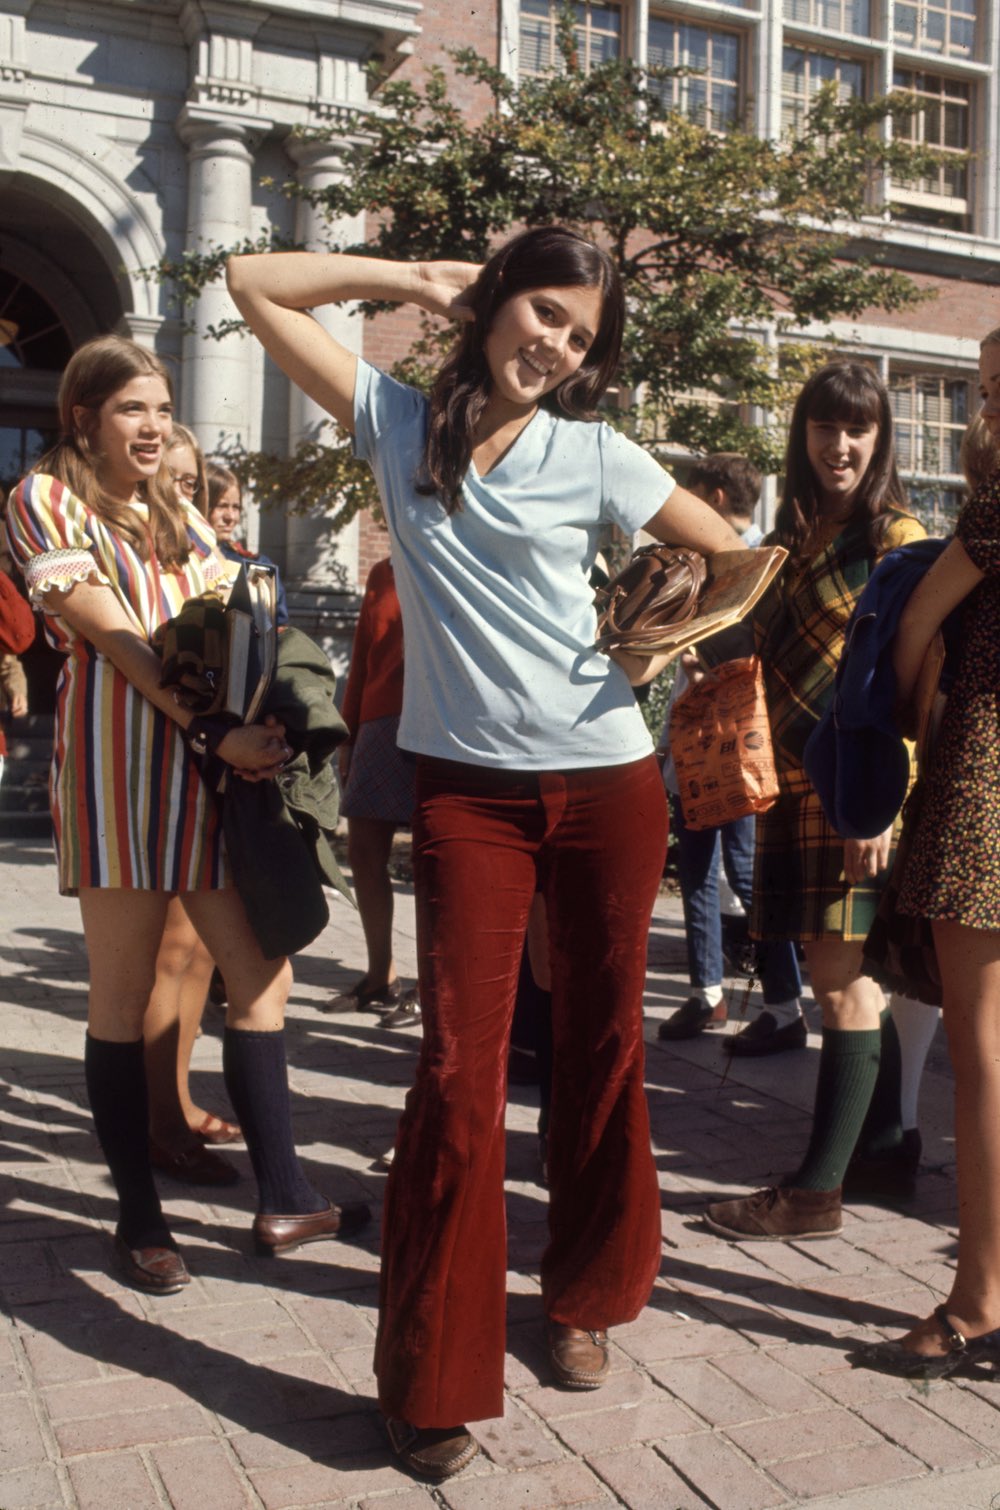 Subject: High school student wearing hippy fashion consisting of bell bottoms and boots. October 1969 Photographer- Arthur Schatz Time Inc owned merlin-1201962